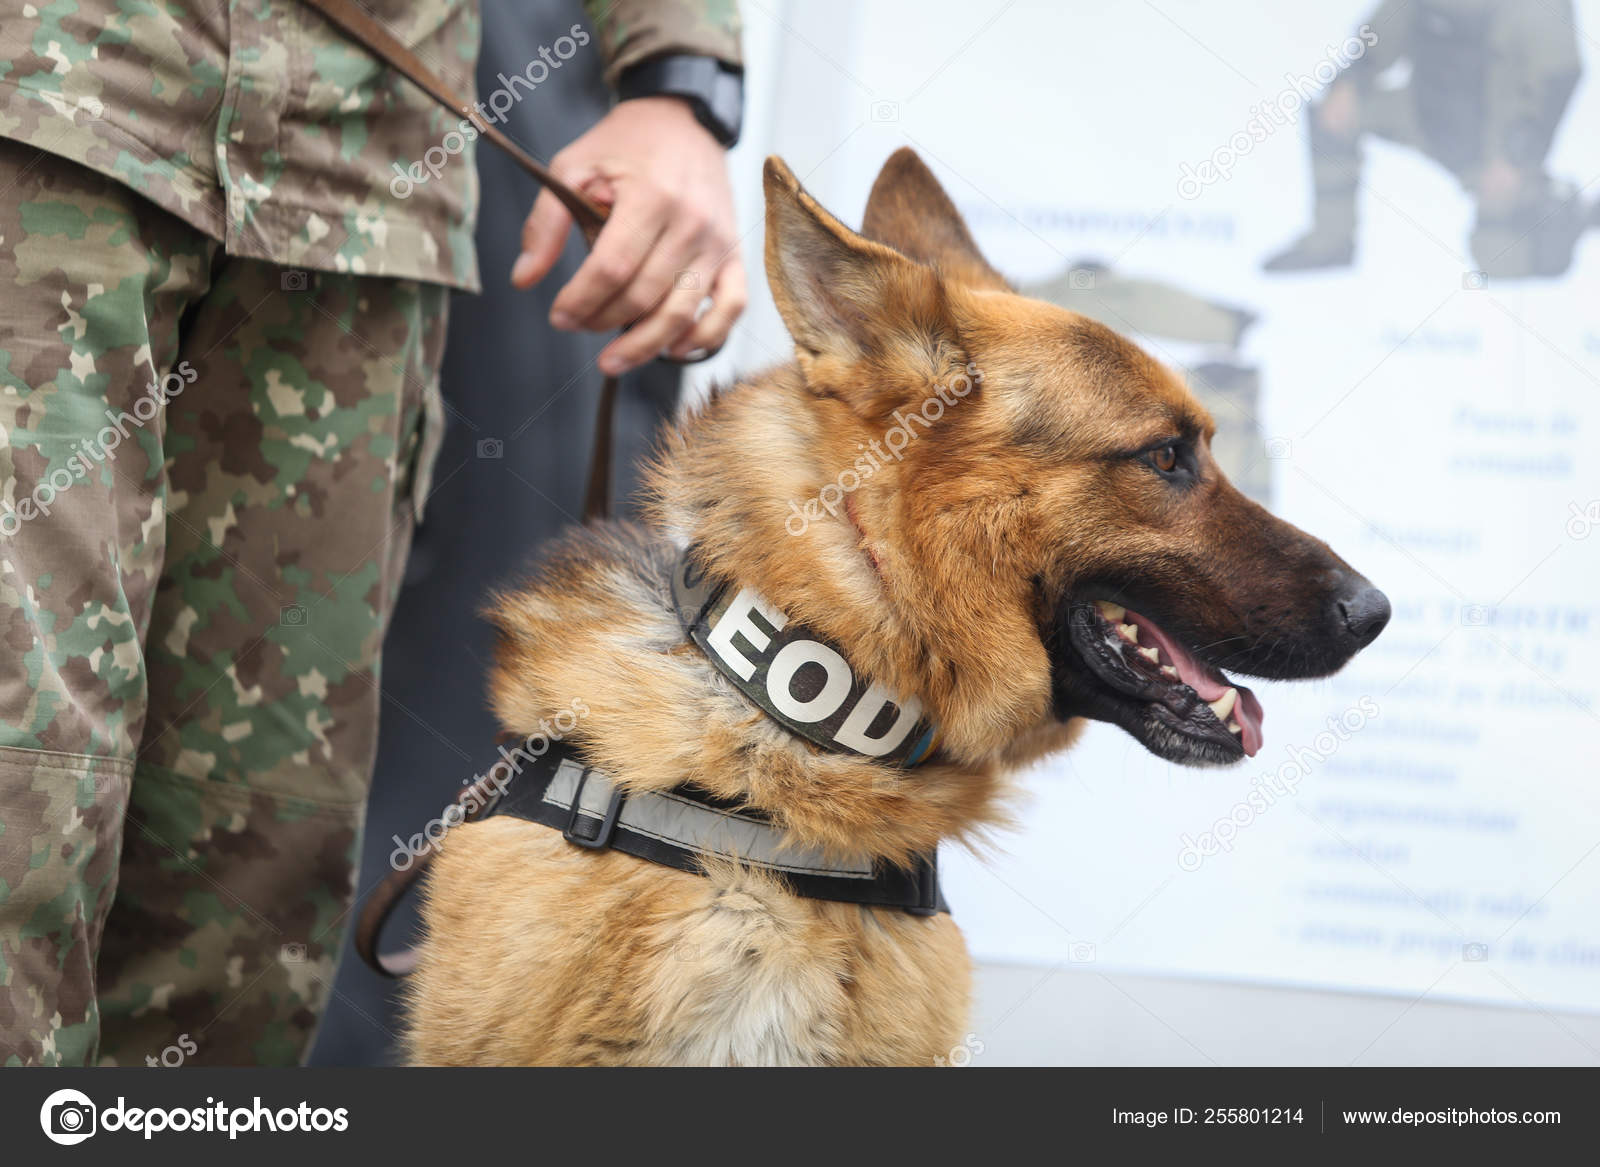 German Shepherd Army Dog Trained To Detect Explosives Together Stock Photo C Mircea Moira 255801214